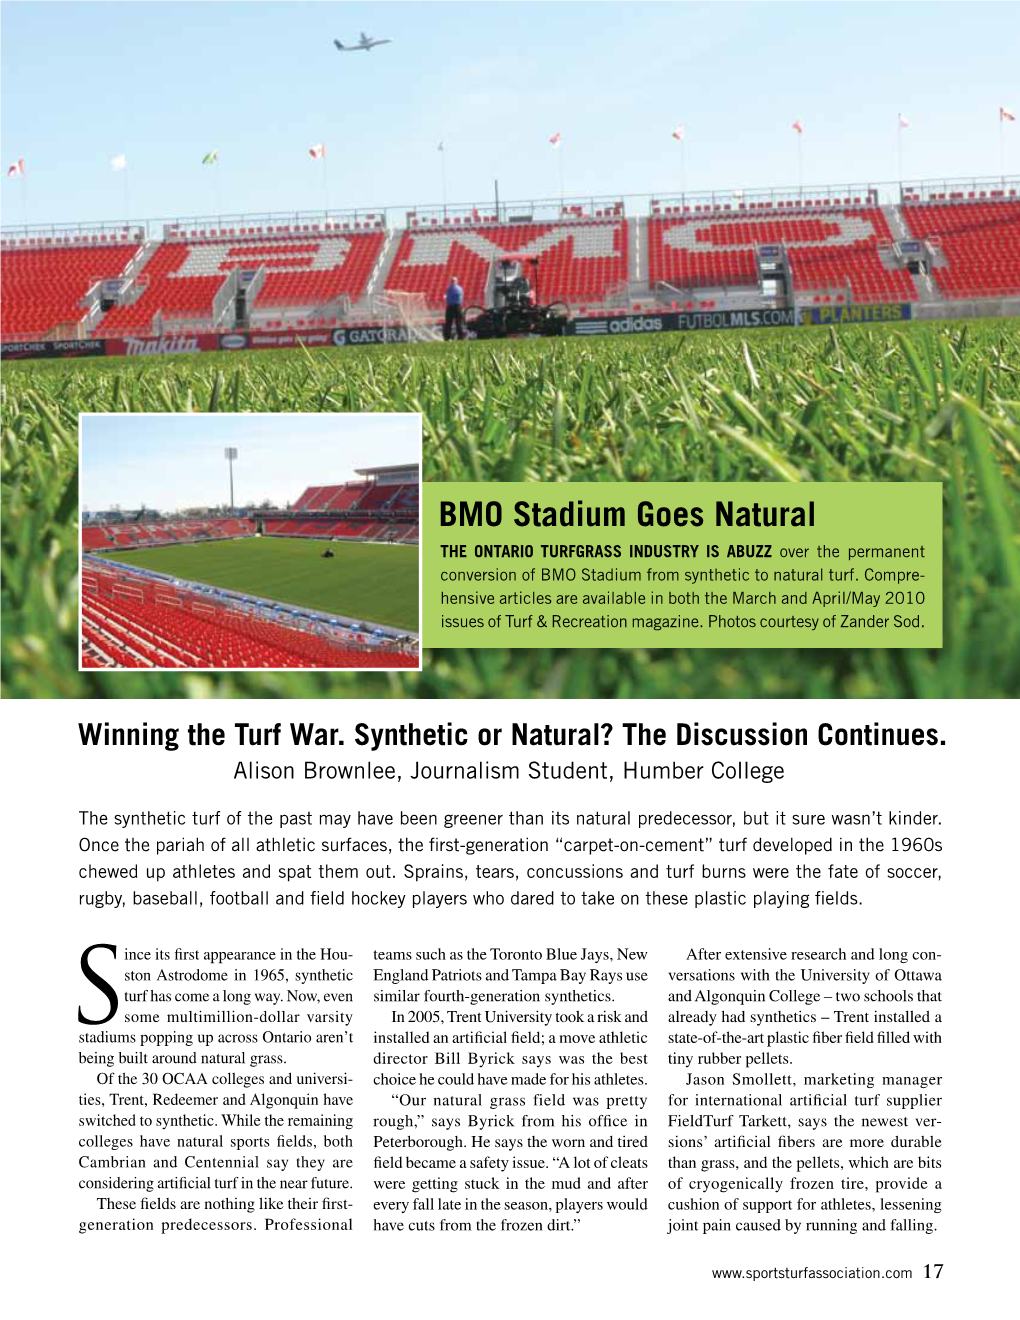 BMO Stadium Goes Natural the Ontario Turfgrass Industry Is Abuzz Over the Permanent Conversion of BMO Stadium from Synthetic to Natural Turf